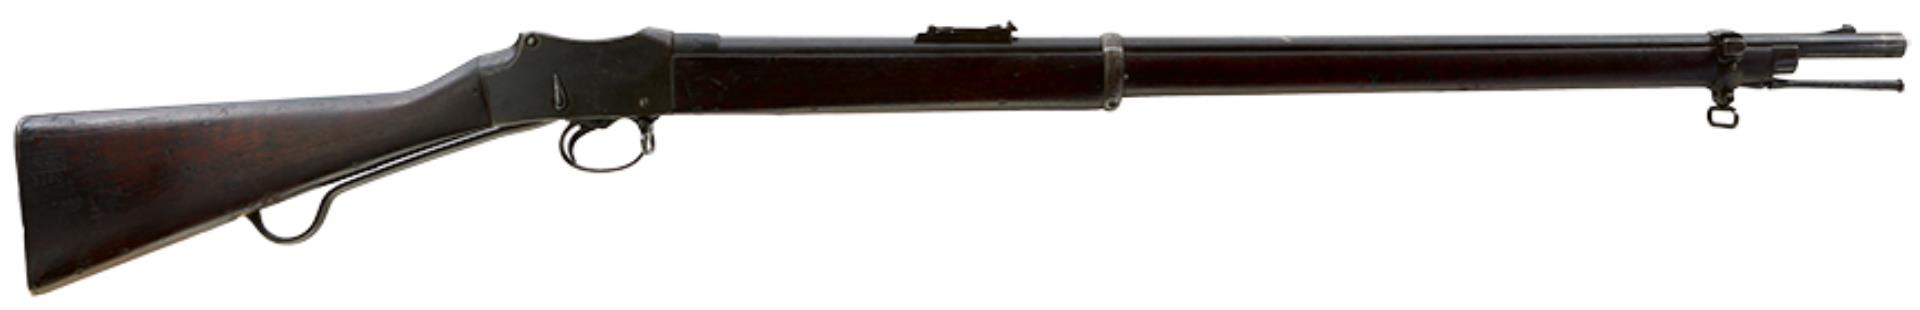 A .450 OBSOLETE CALIBRE MARTINI HENRY SERVICE RIFLE, 32.5inch sighted barrel fitted with ramp and